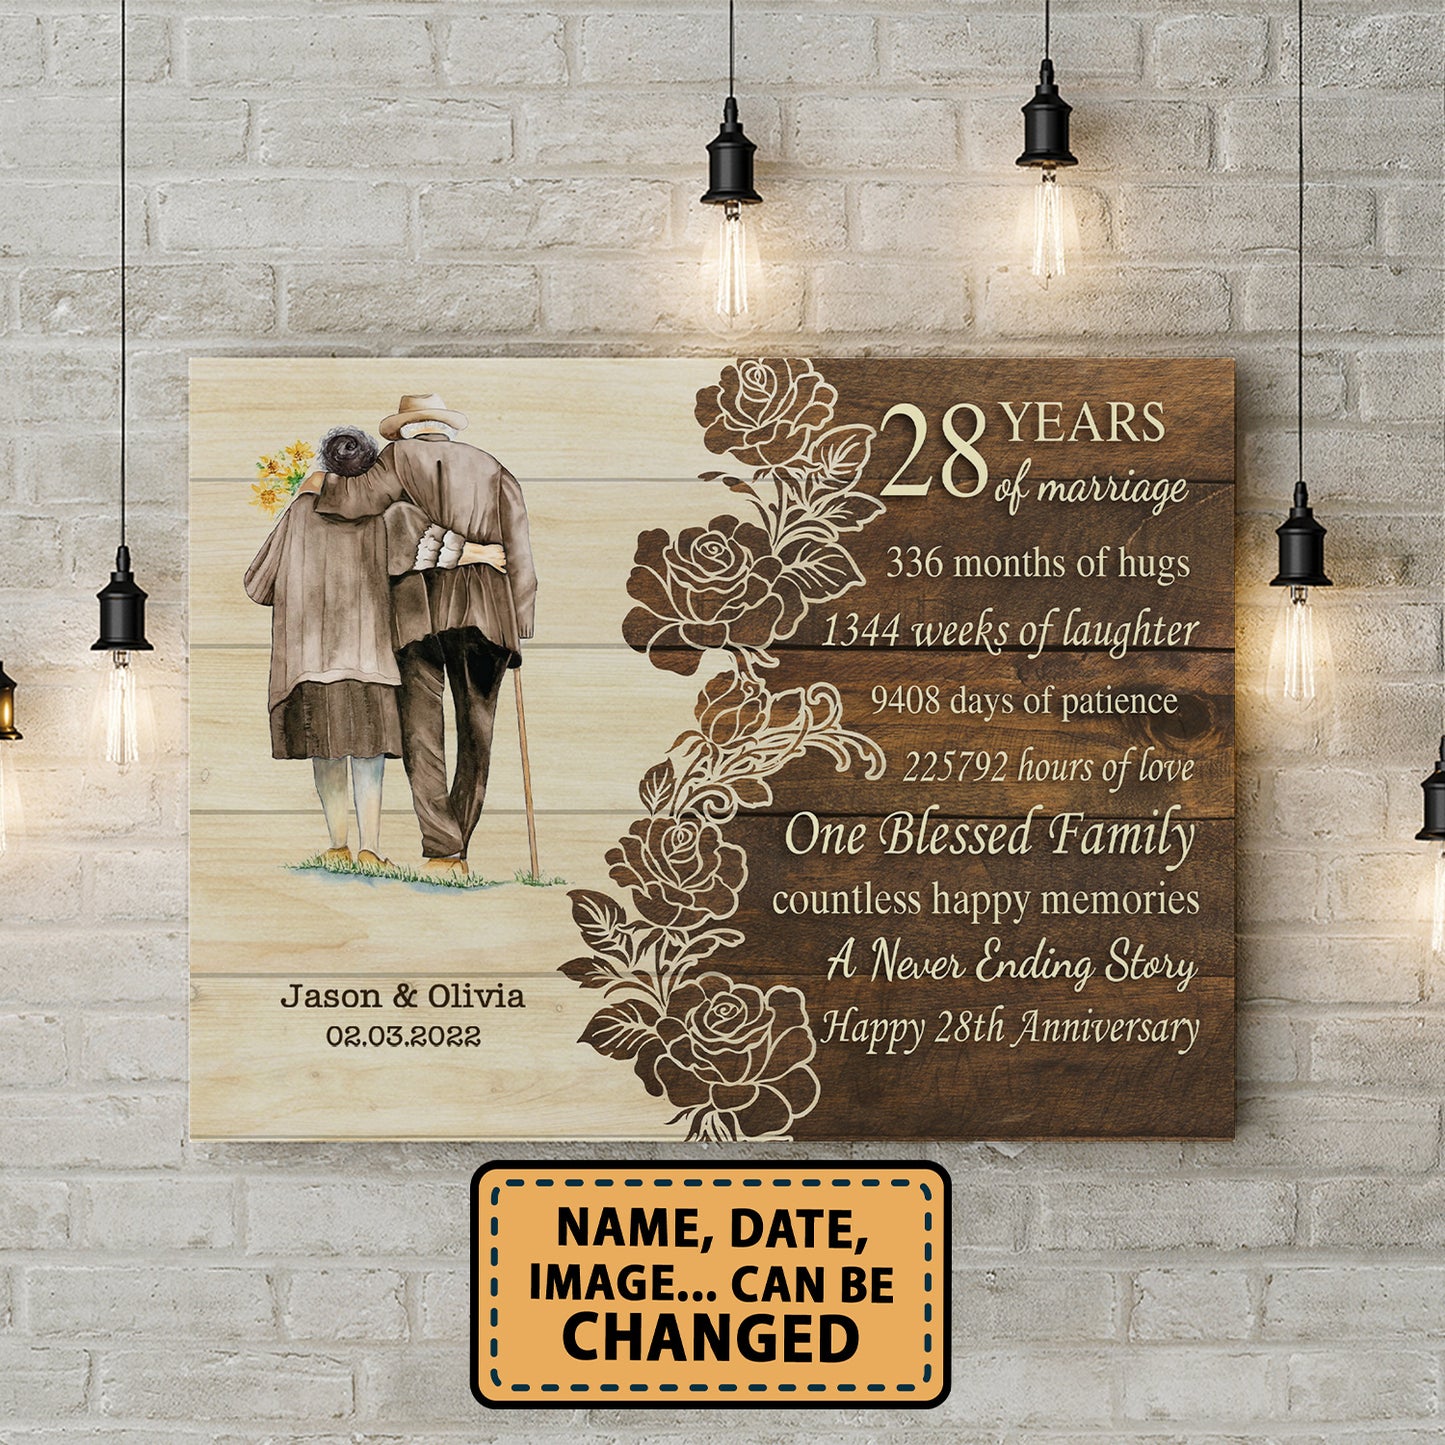 Happy 28th Anniversary 28 Years Of Marriage Personalizedwitch Canvas